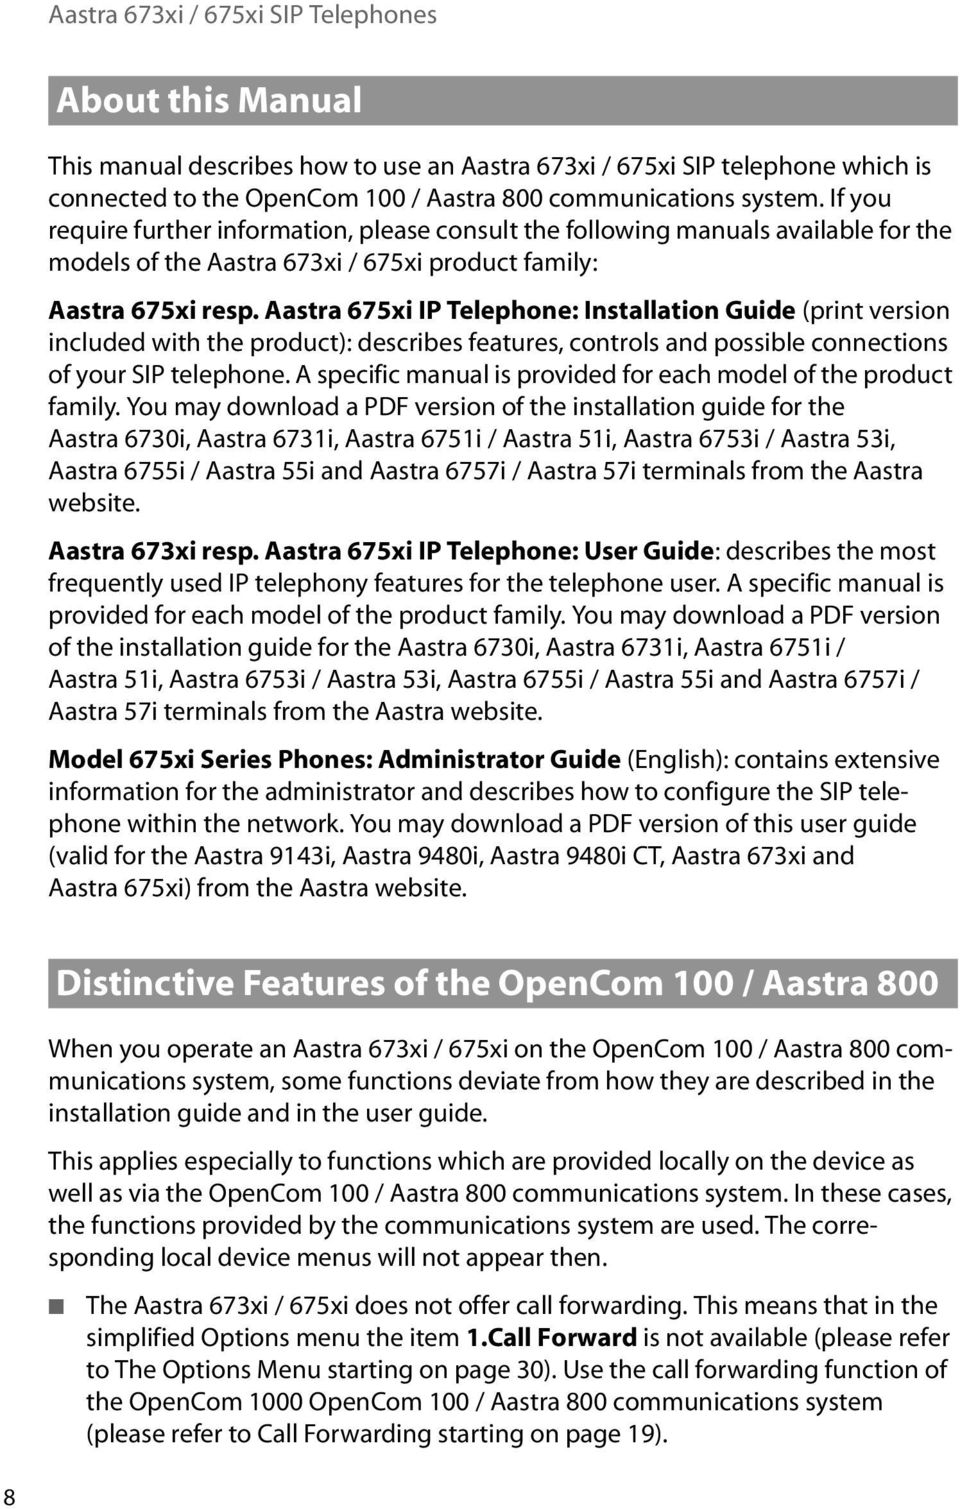 Aastra 675xi IP Telephone: Installation Guide (print version included with the product): describes features, controls and possible connections of your SIP telephone.